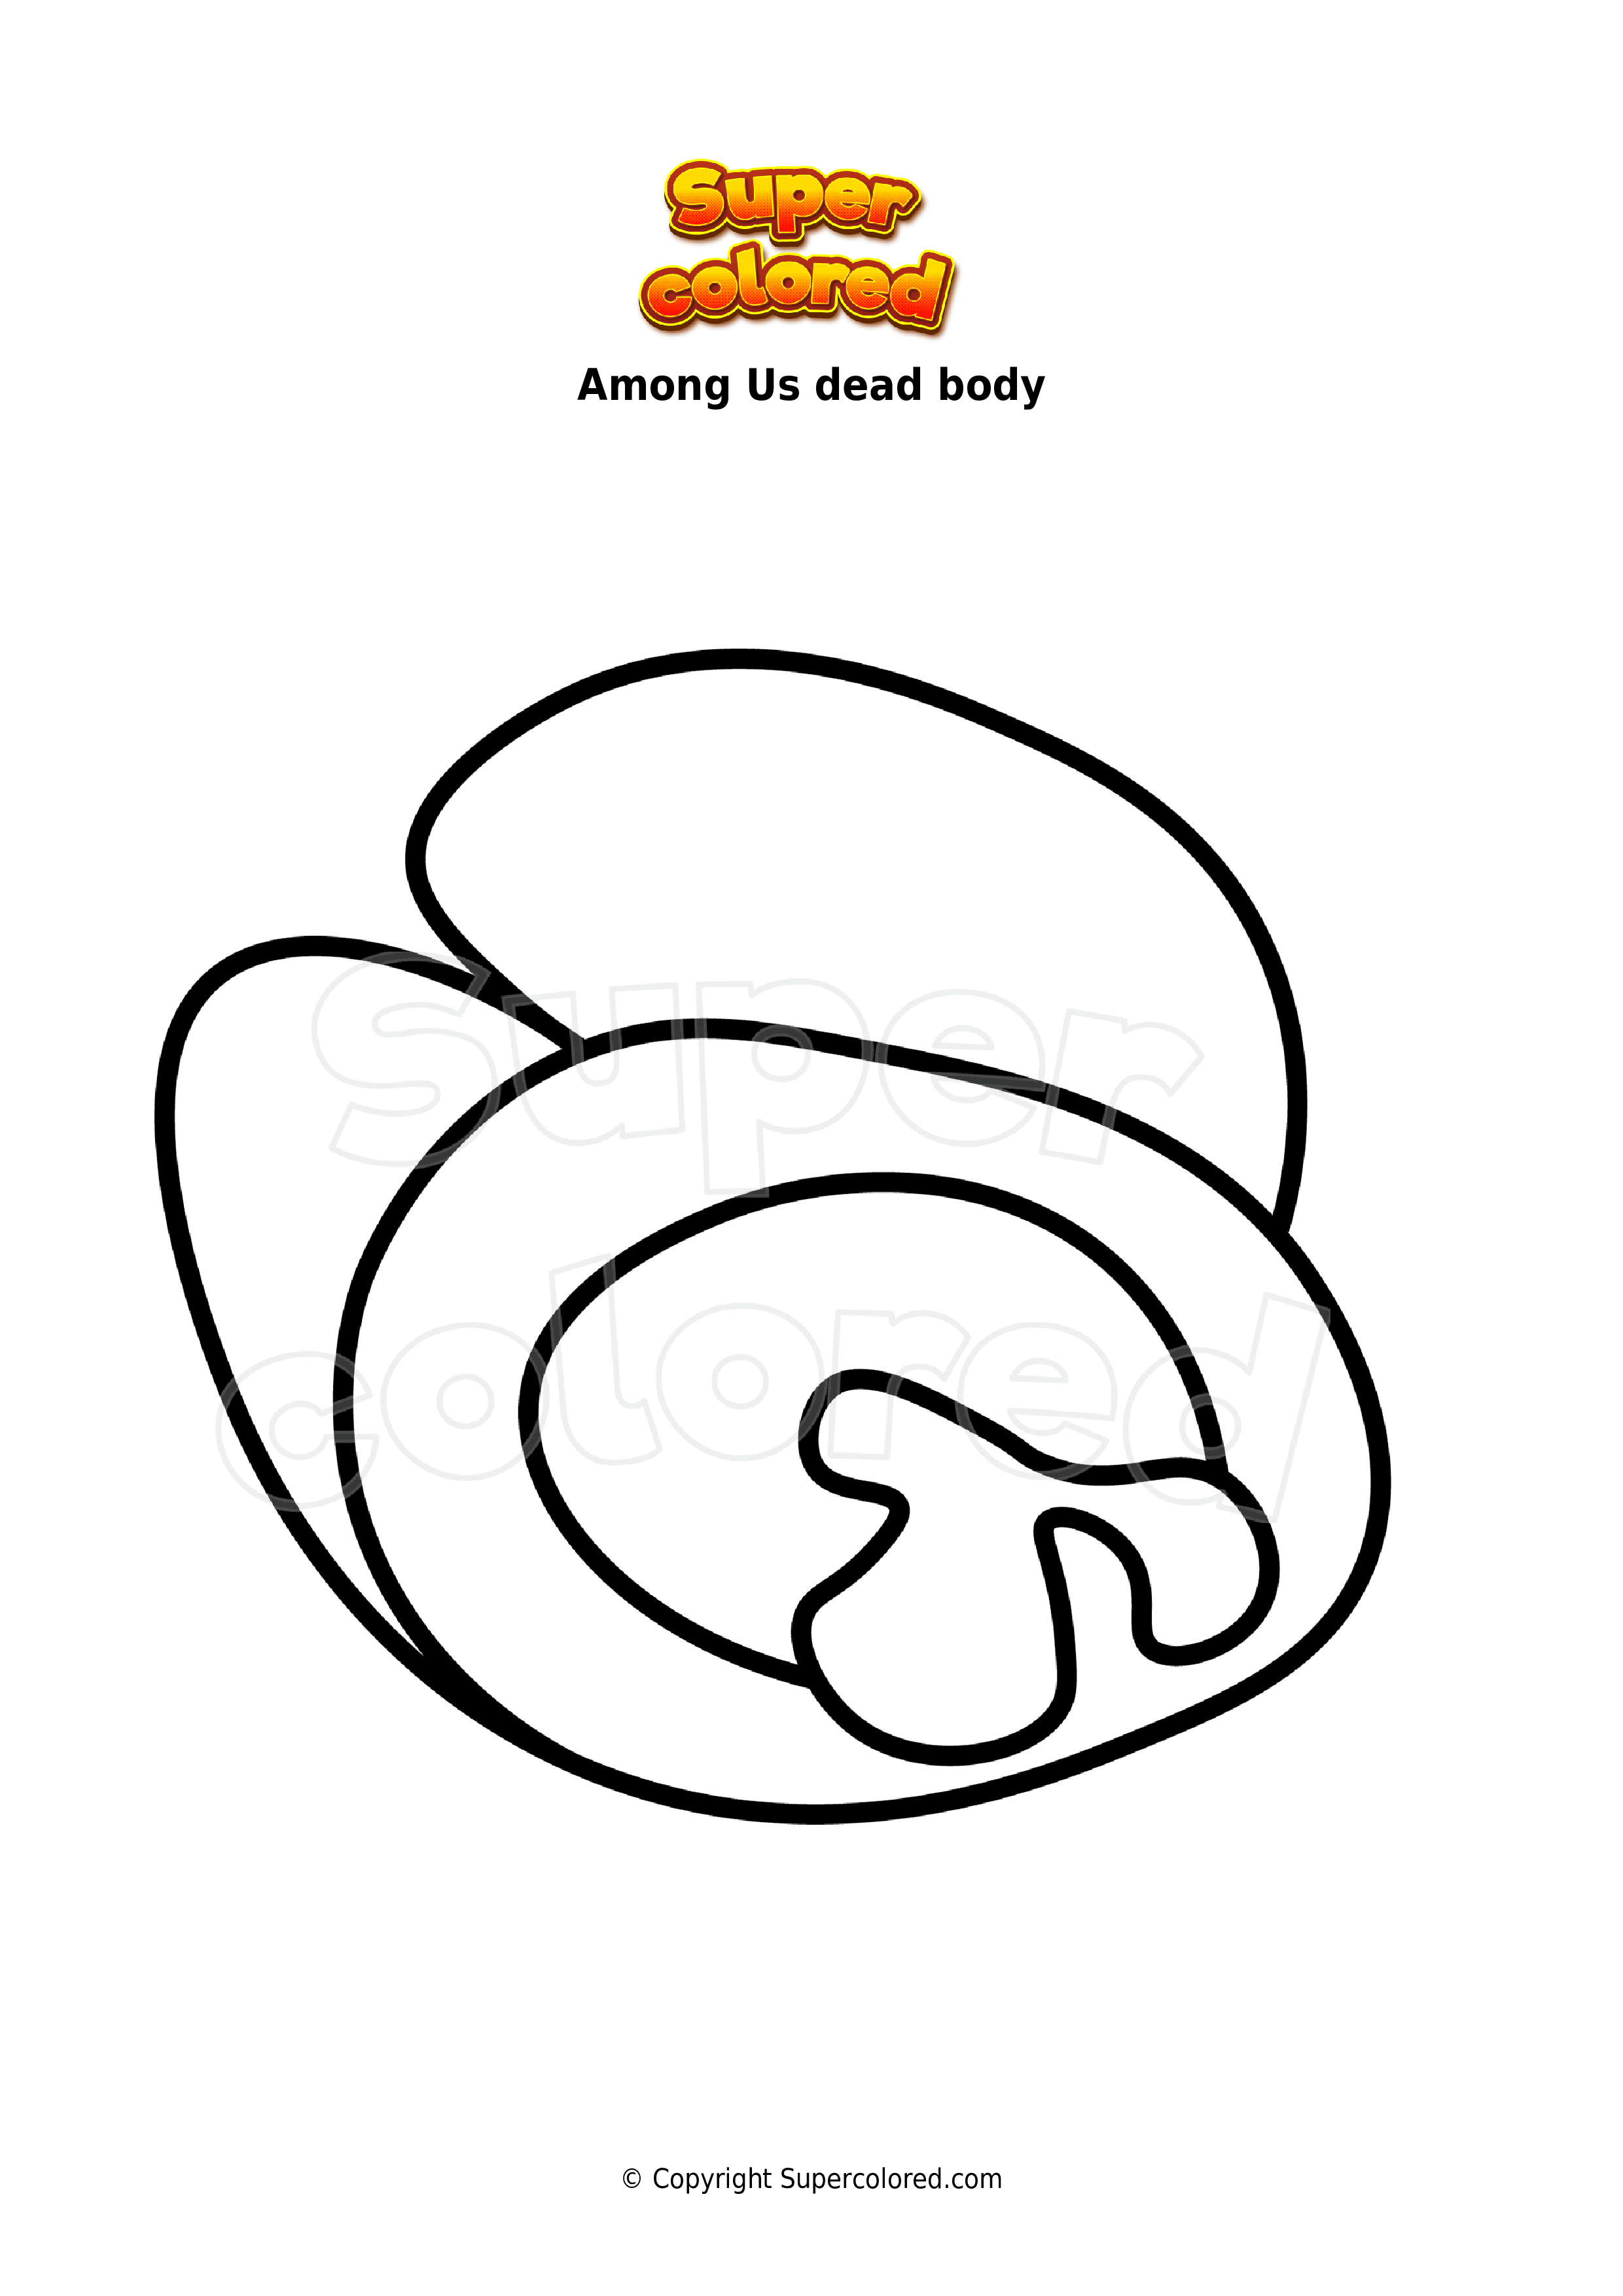 Coloring page Among Us dead body   Supercolored.com